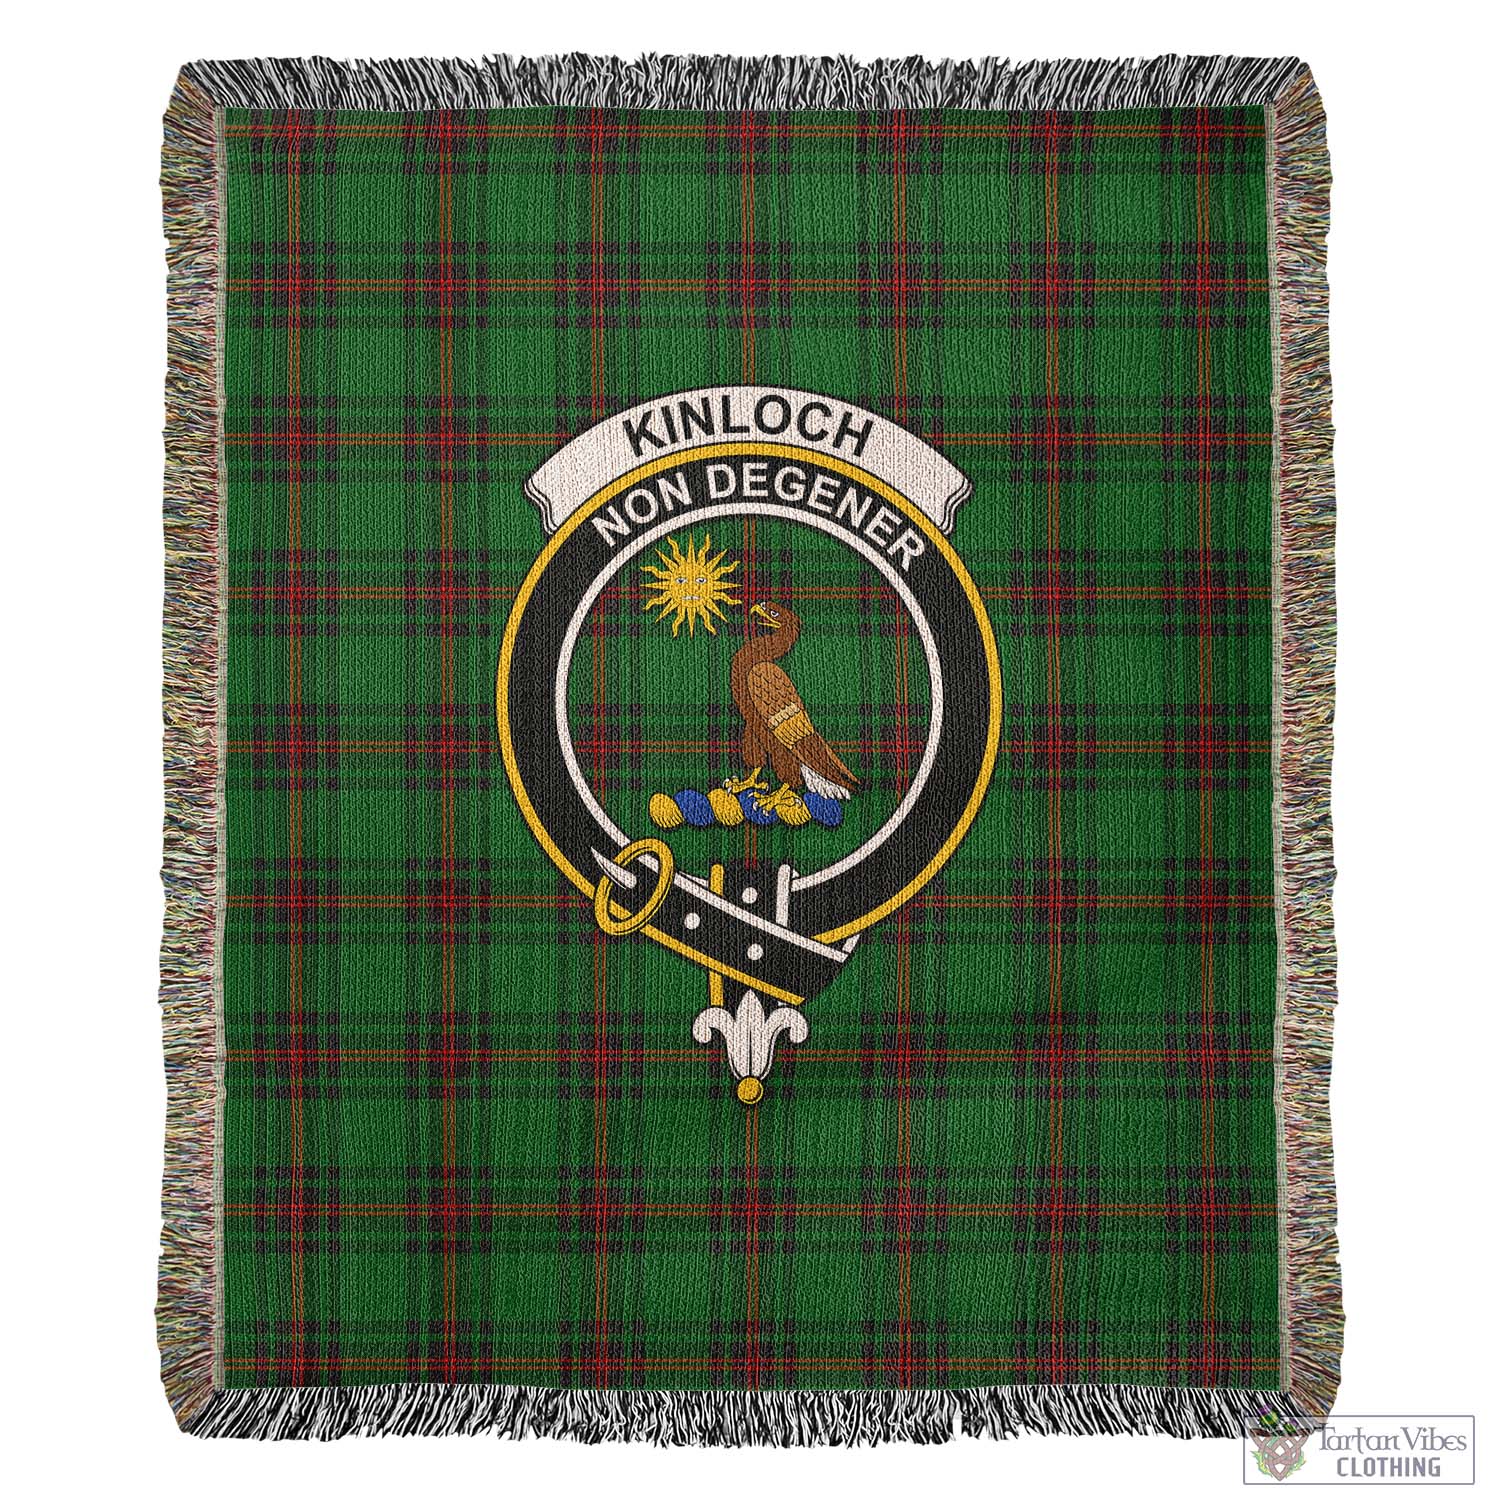 Tartan Vibes Clothing Kinloch Tartan Woven Blanket with Family Crest